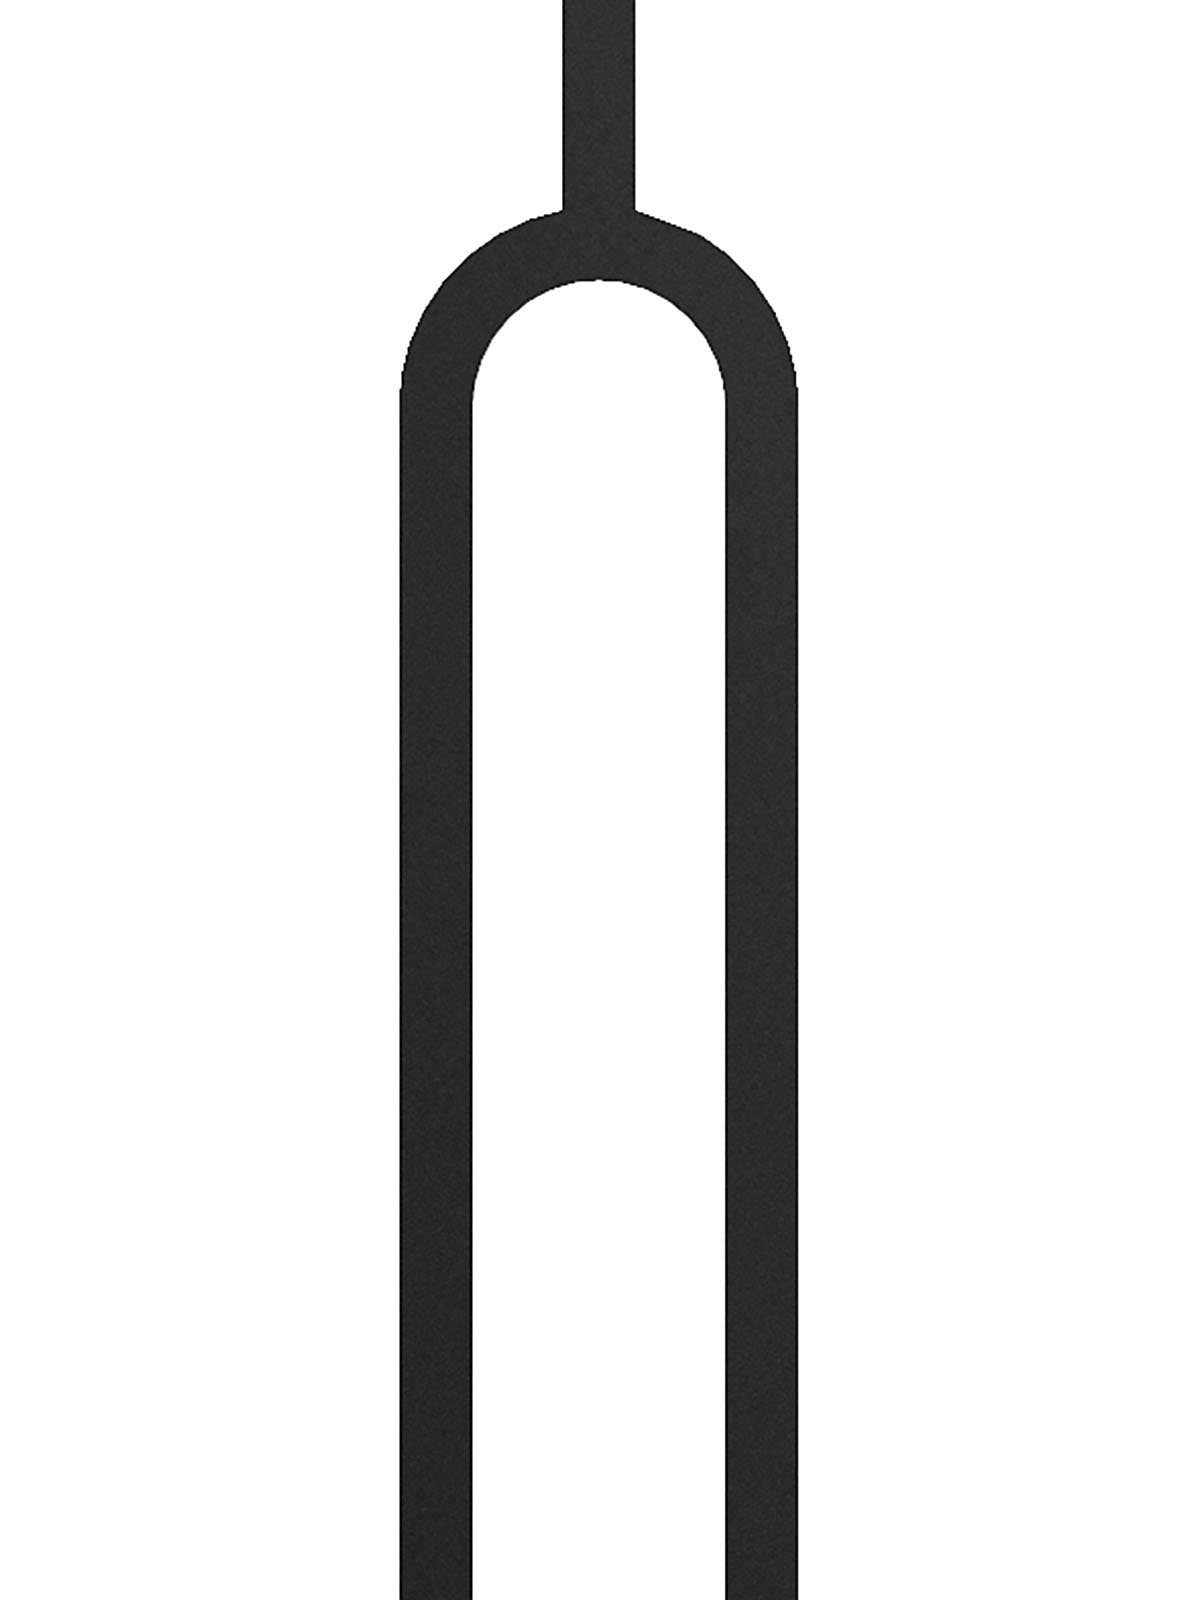 Mega Iron Baluster 9988 - 3/4" Square - Contemporary Hoop Oval